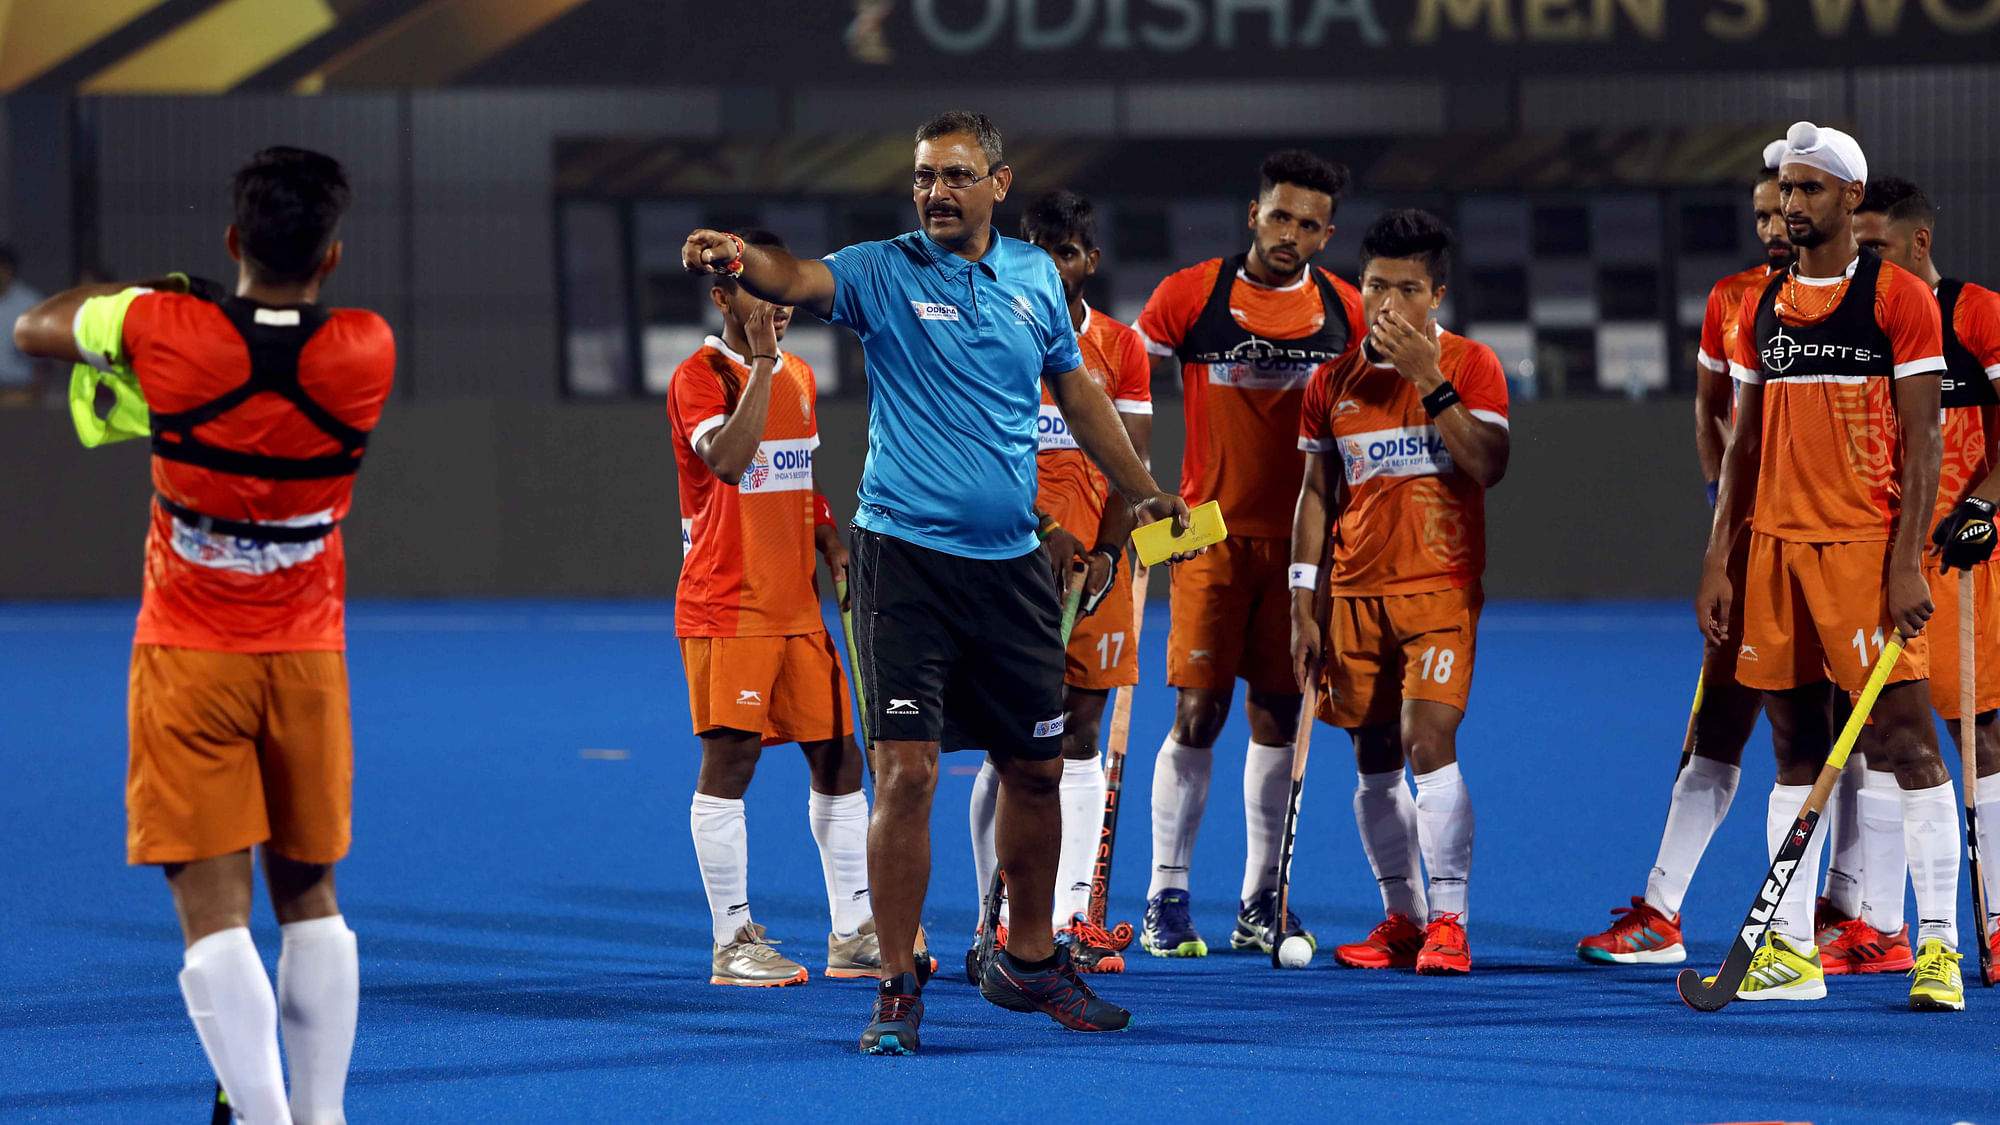 The Indian men’s hockey team at a practice session ahead of the World Cup that starts on 28 November.